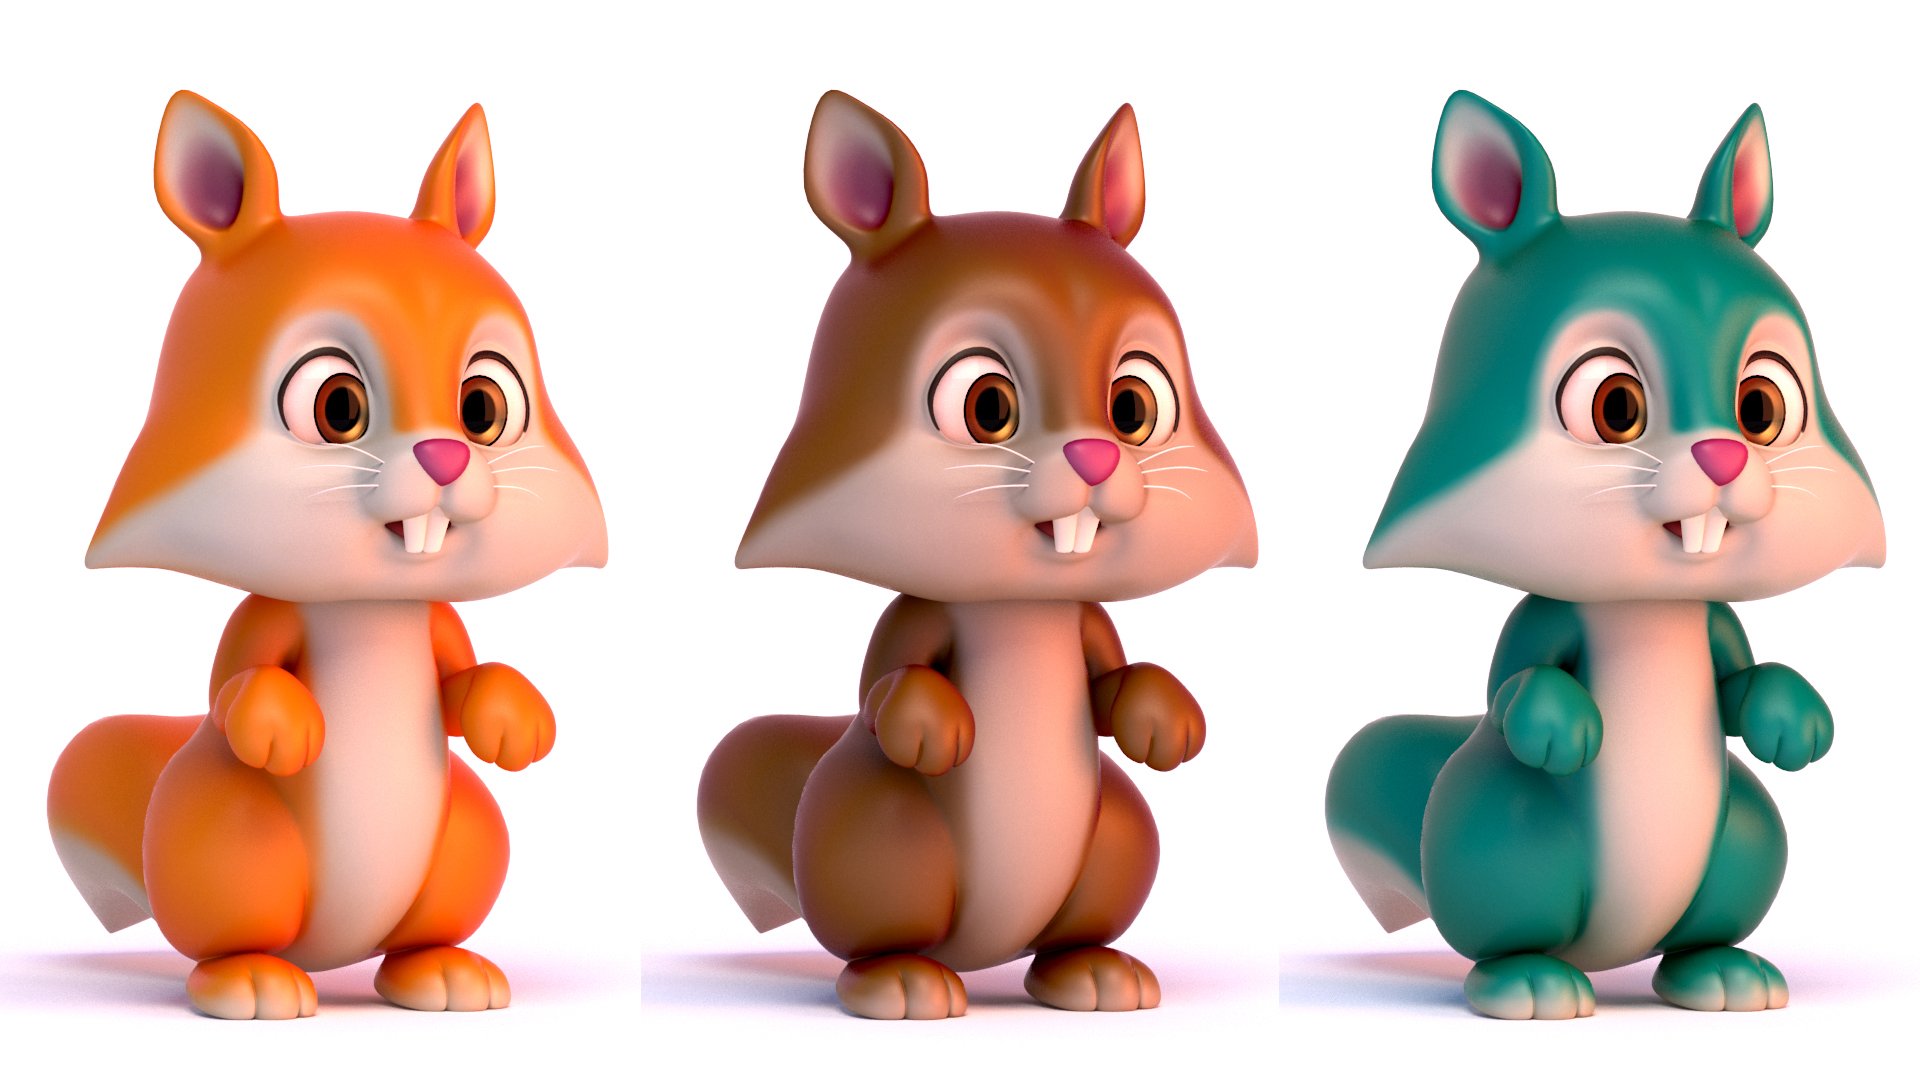 Cute squirrel in different colors.